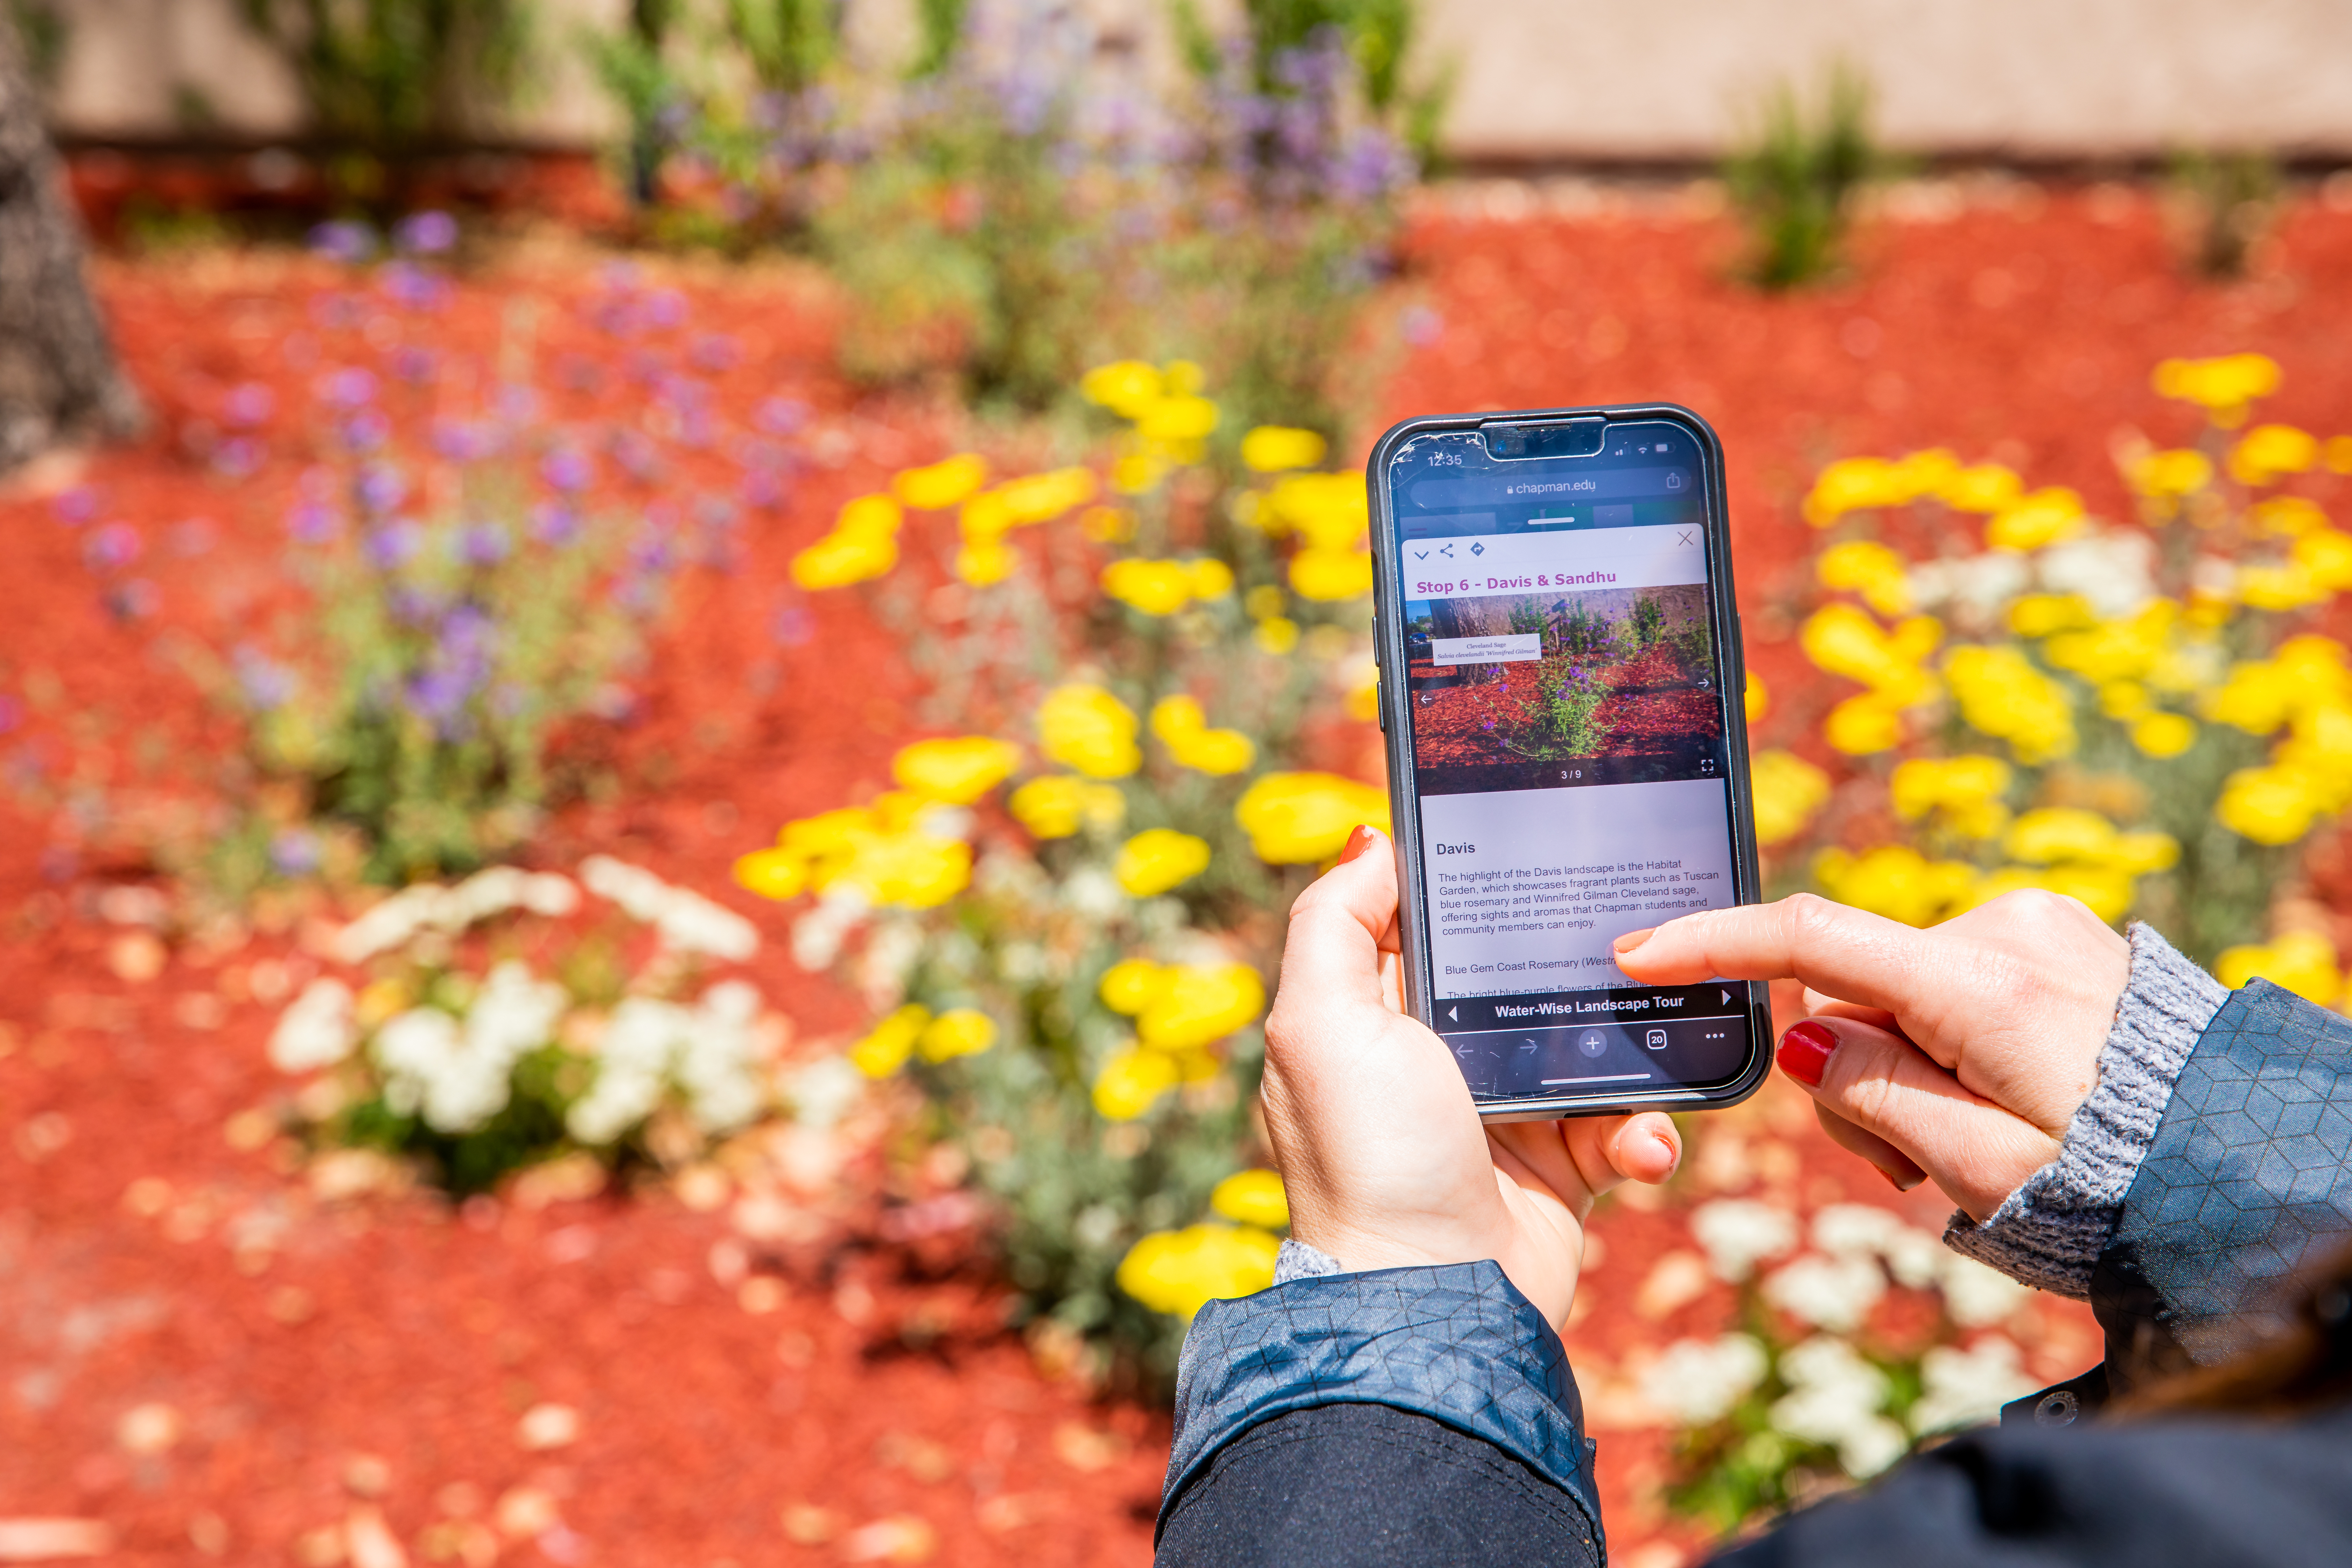 Smartphone shows information about landscaping on campus